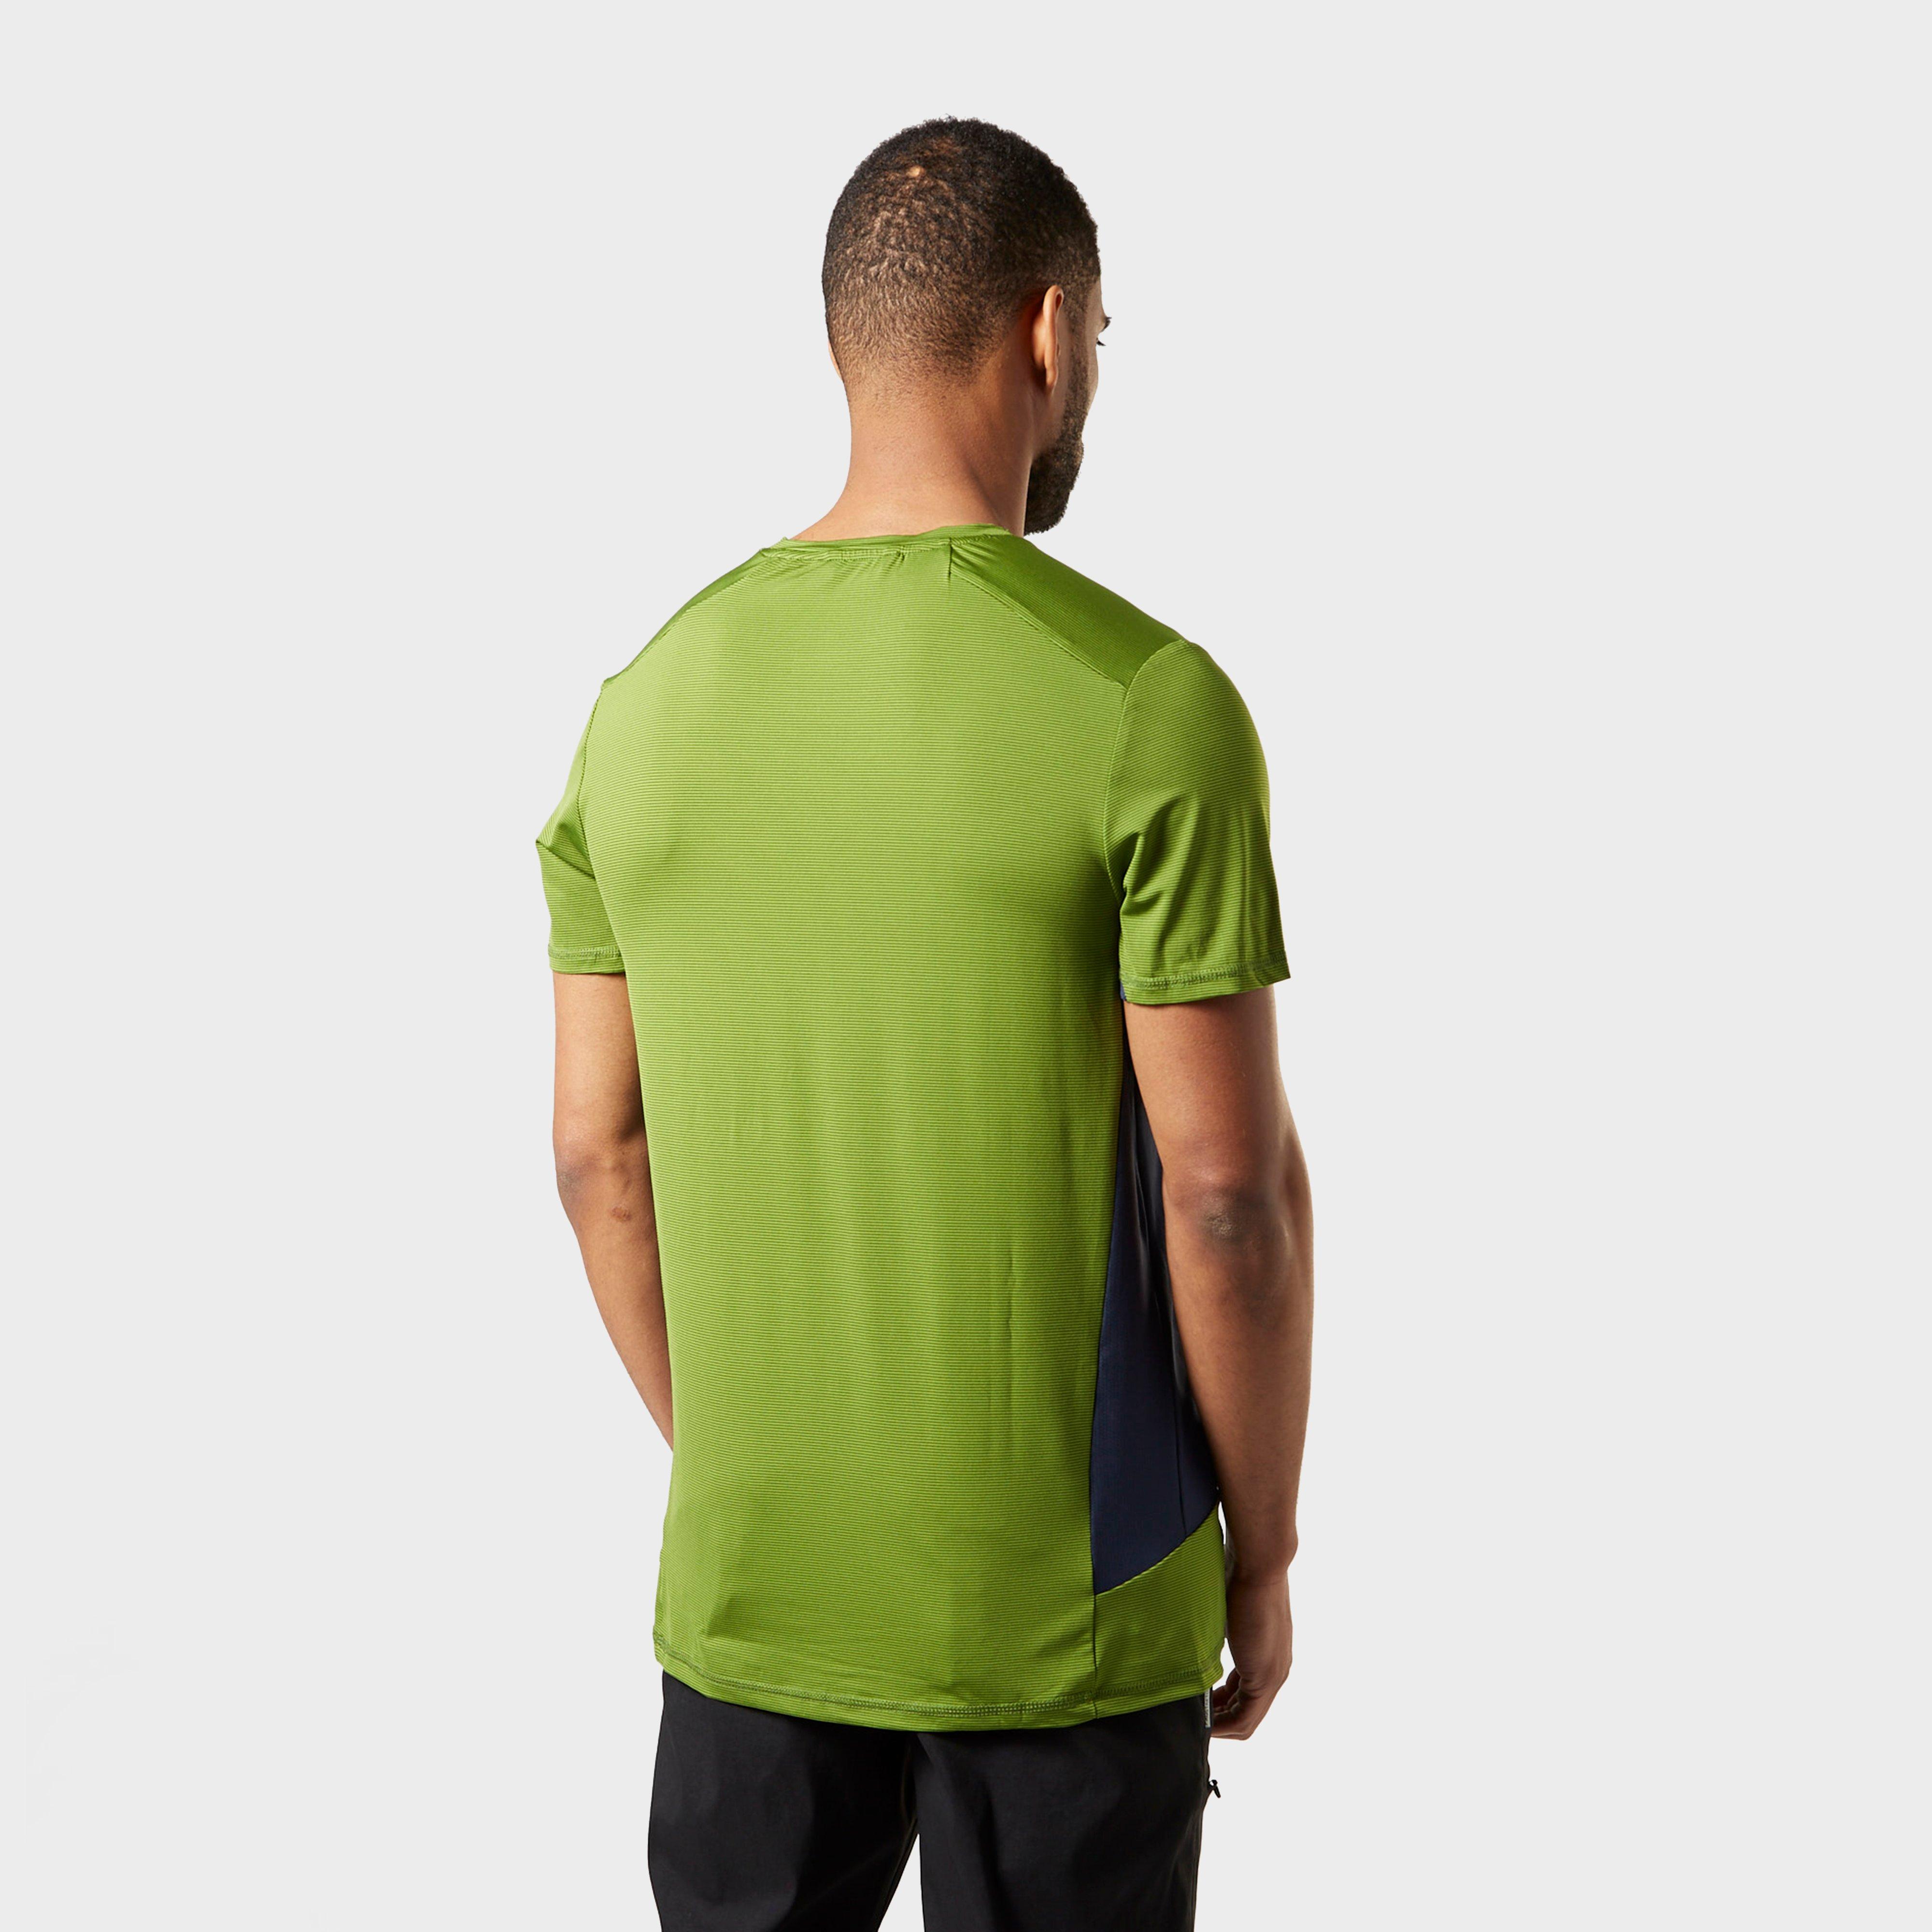 Craghoppers Men's Atmos Short Sleeved T-Shirt Review